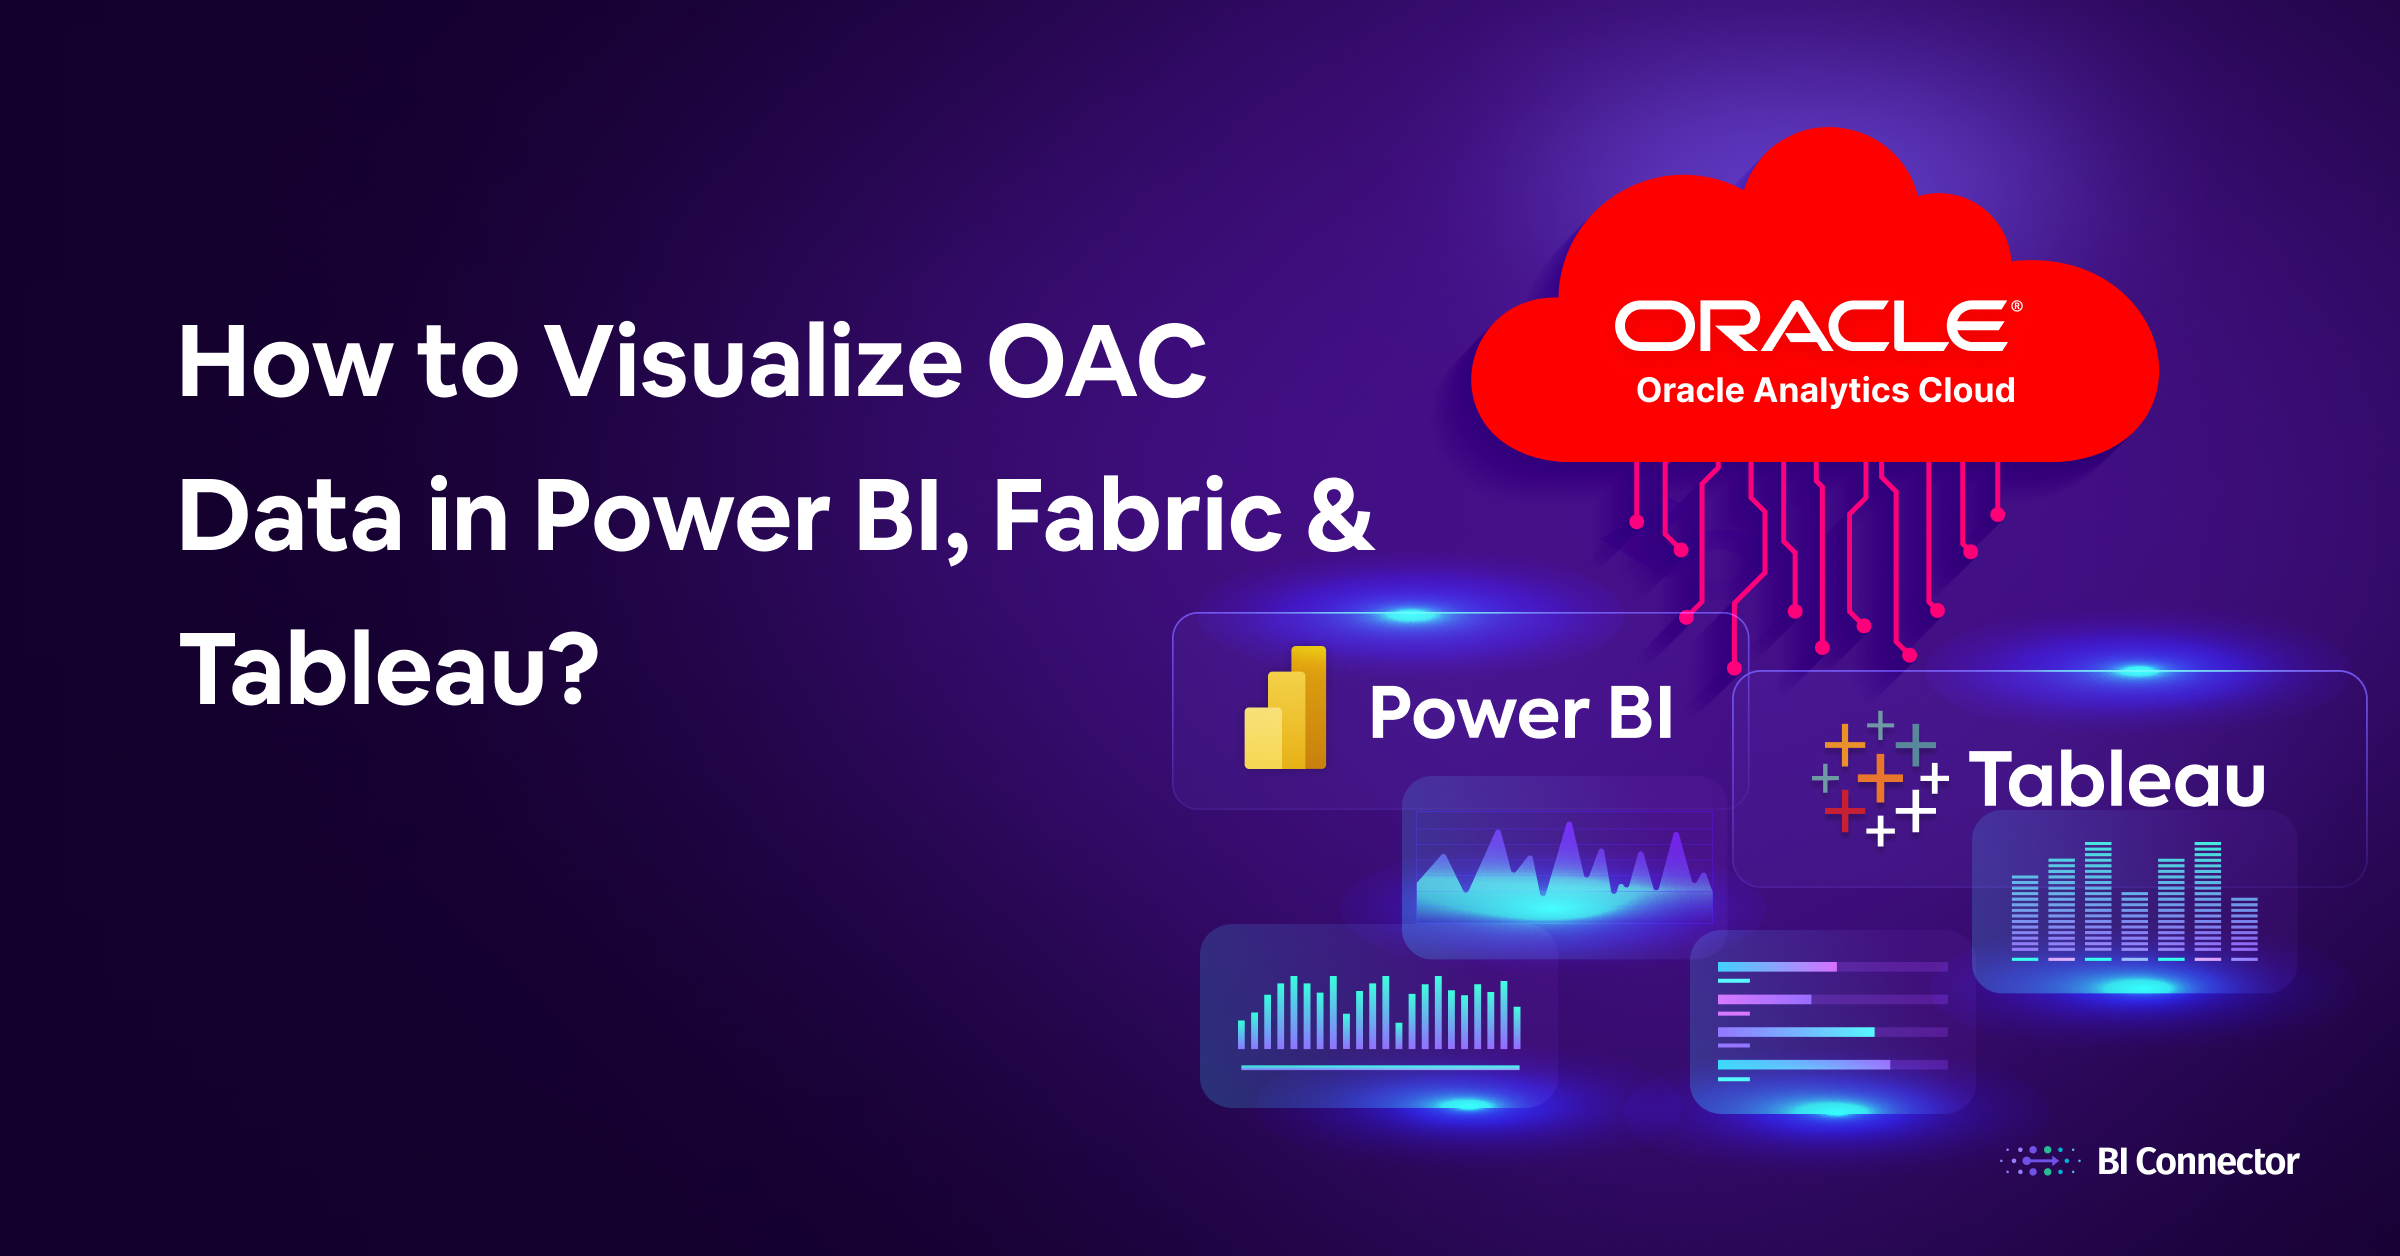 BI Connector to visualize OAC Data in Power BI, Microsoft Fabric, and Tableau